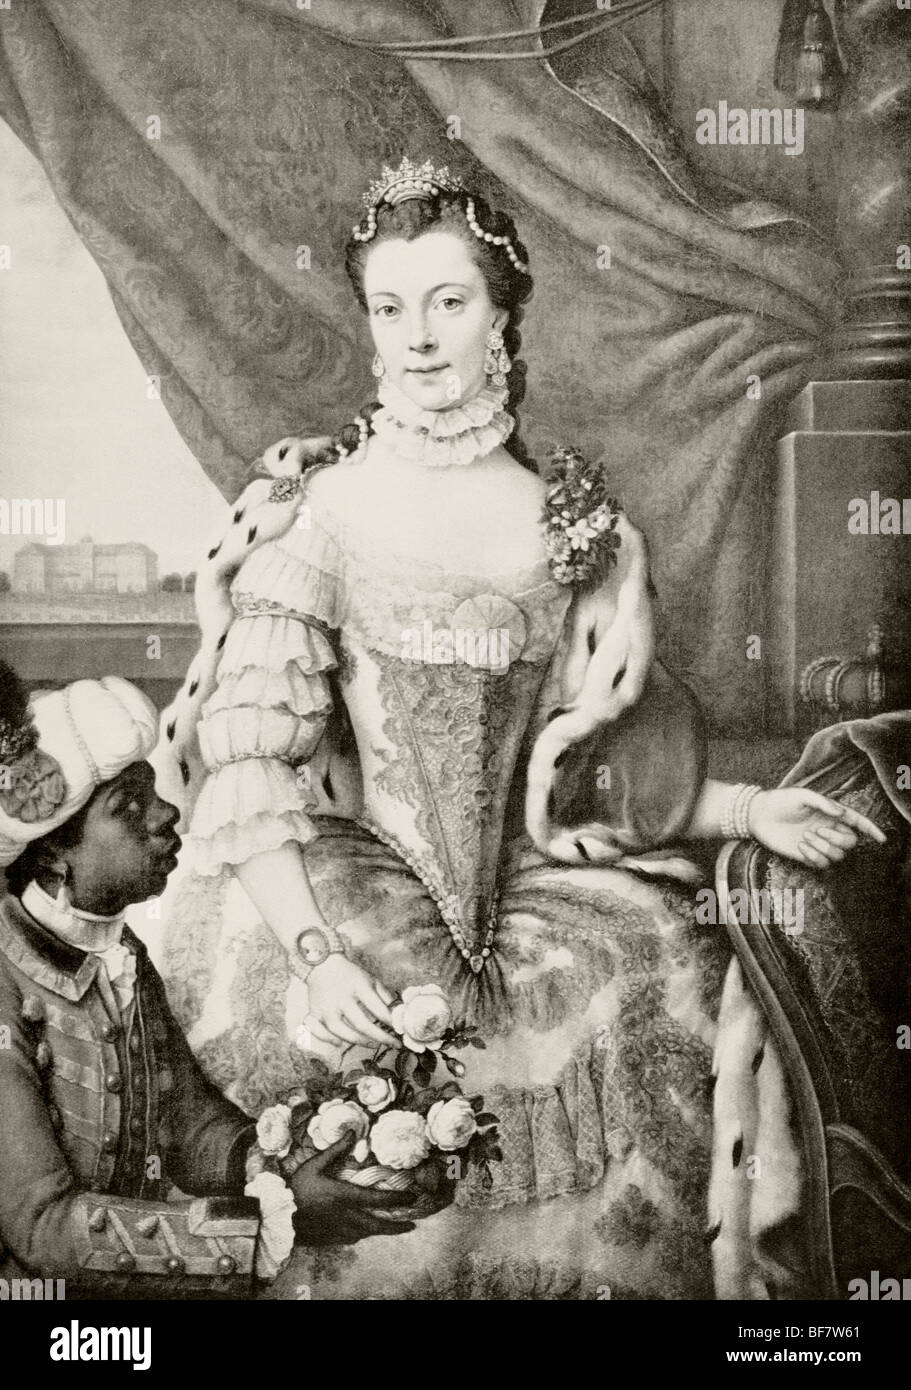 Charlotte of Mecklenburg-Strelitz 1744 to 1818. Queen-consort of United Kingdom as wife of King George III. Stock Photo